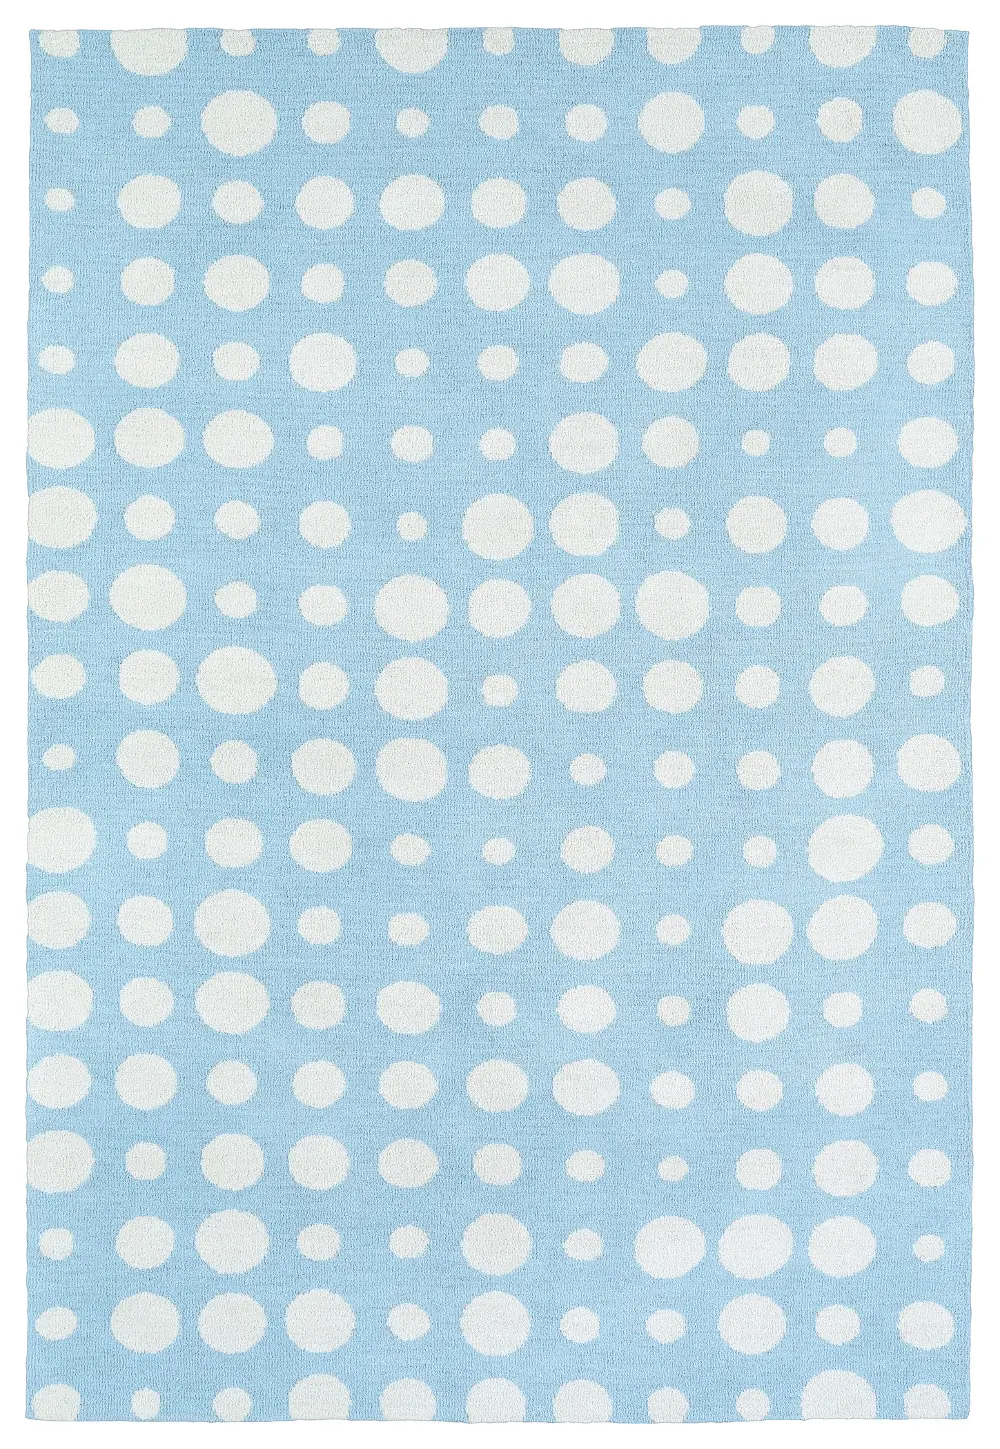 5 x 7 Medium Dotted Ivory and Blue Rug - Lily & Liam-1